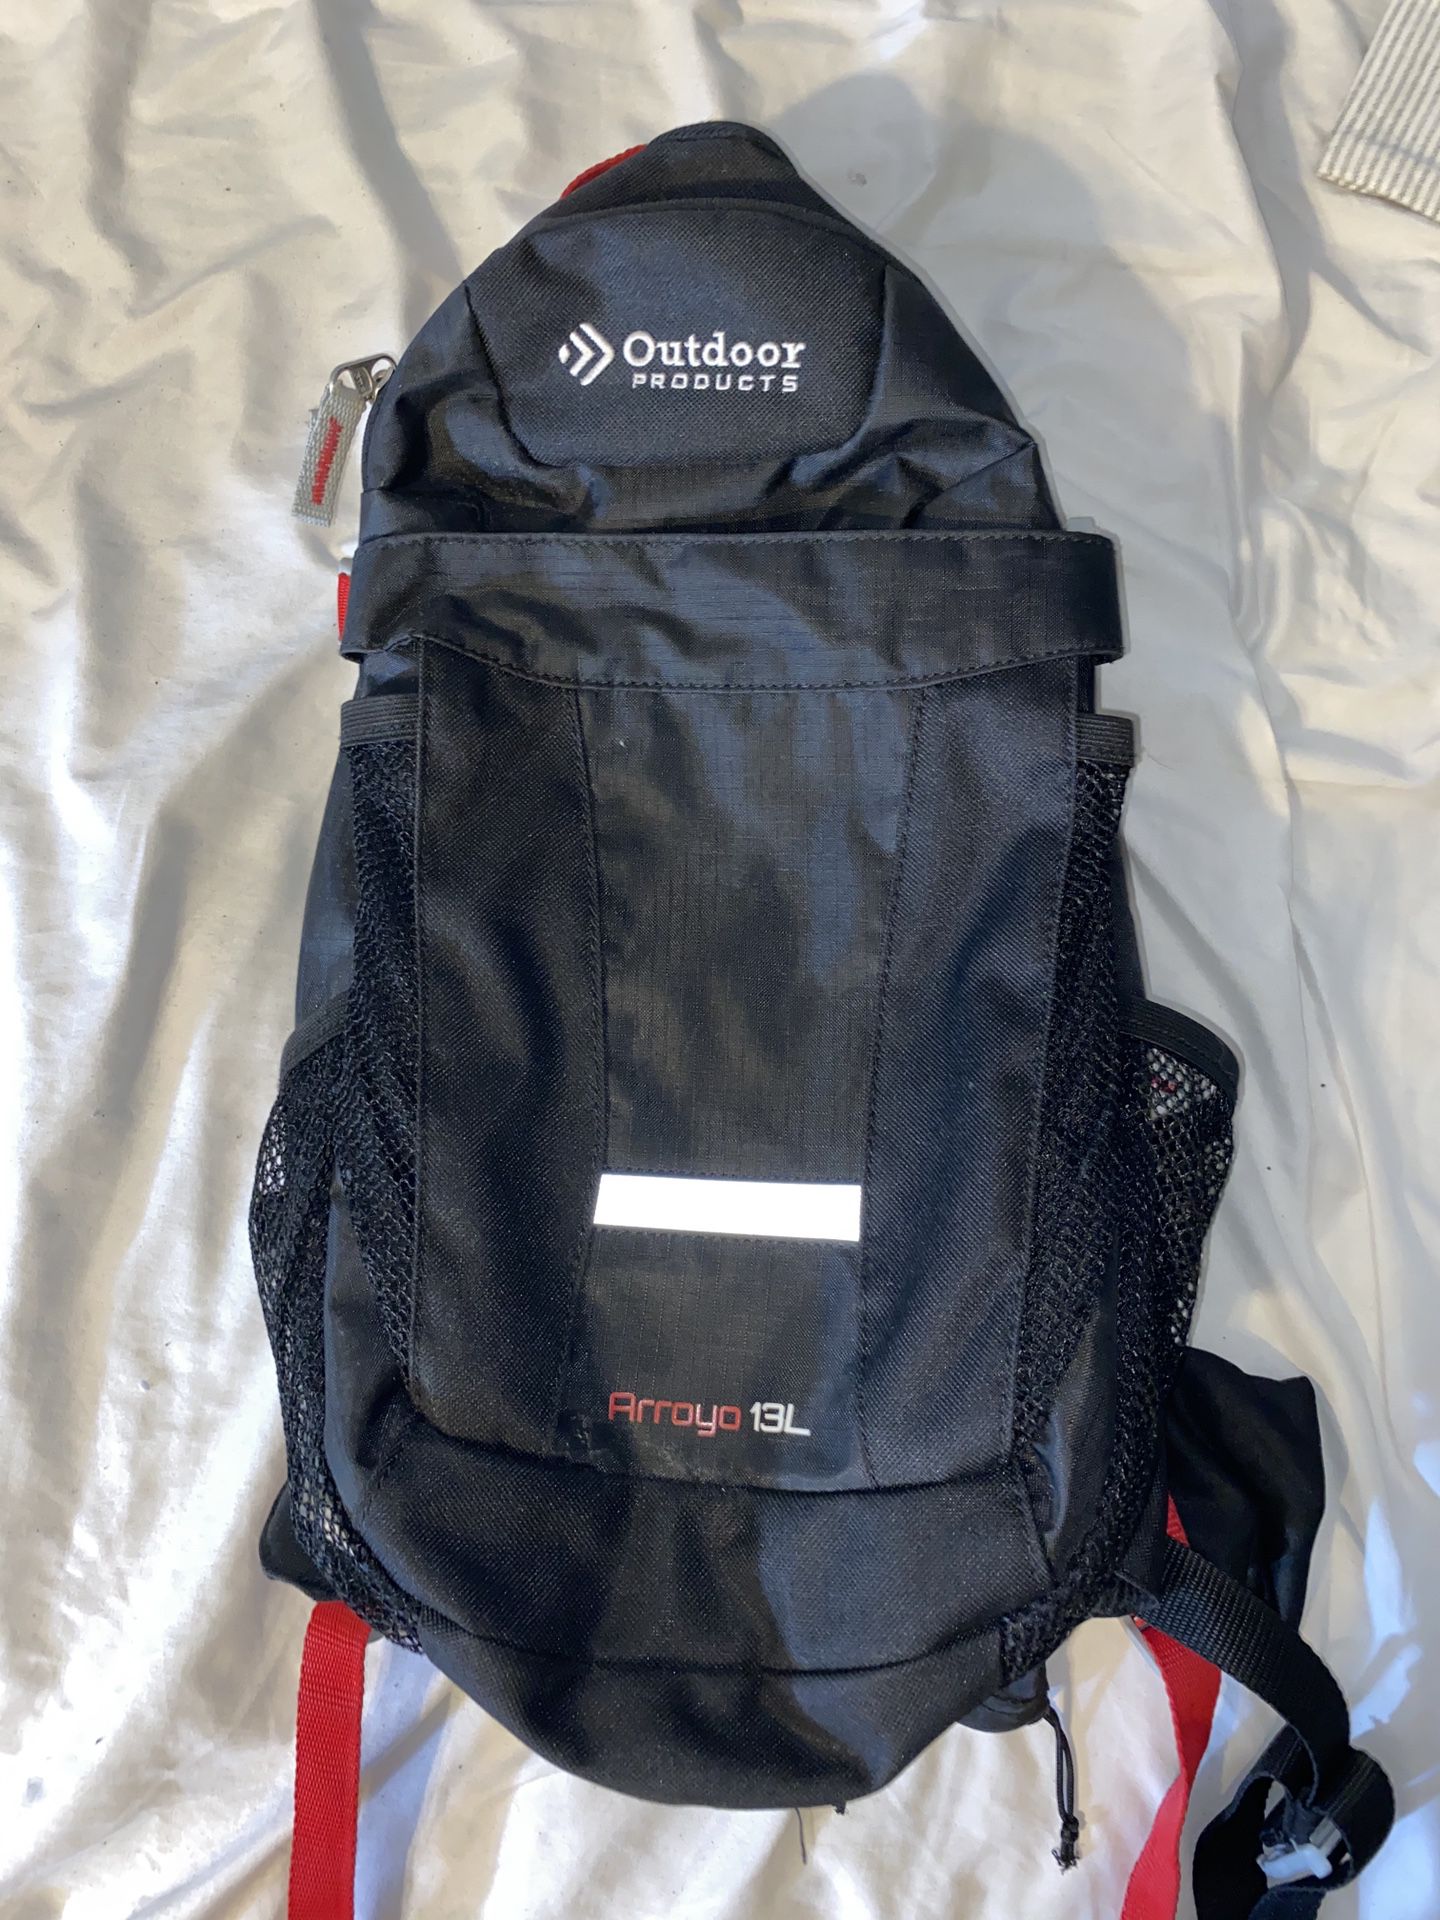 Outdoors products hydration backpack